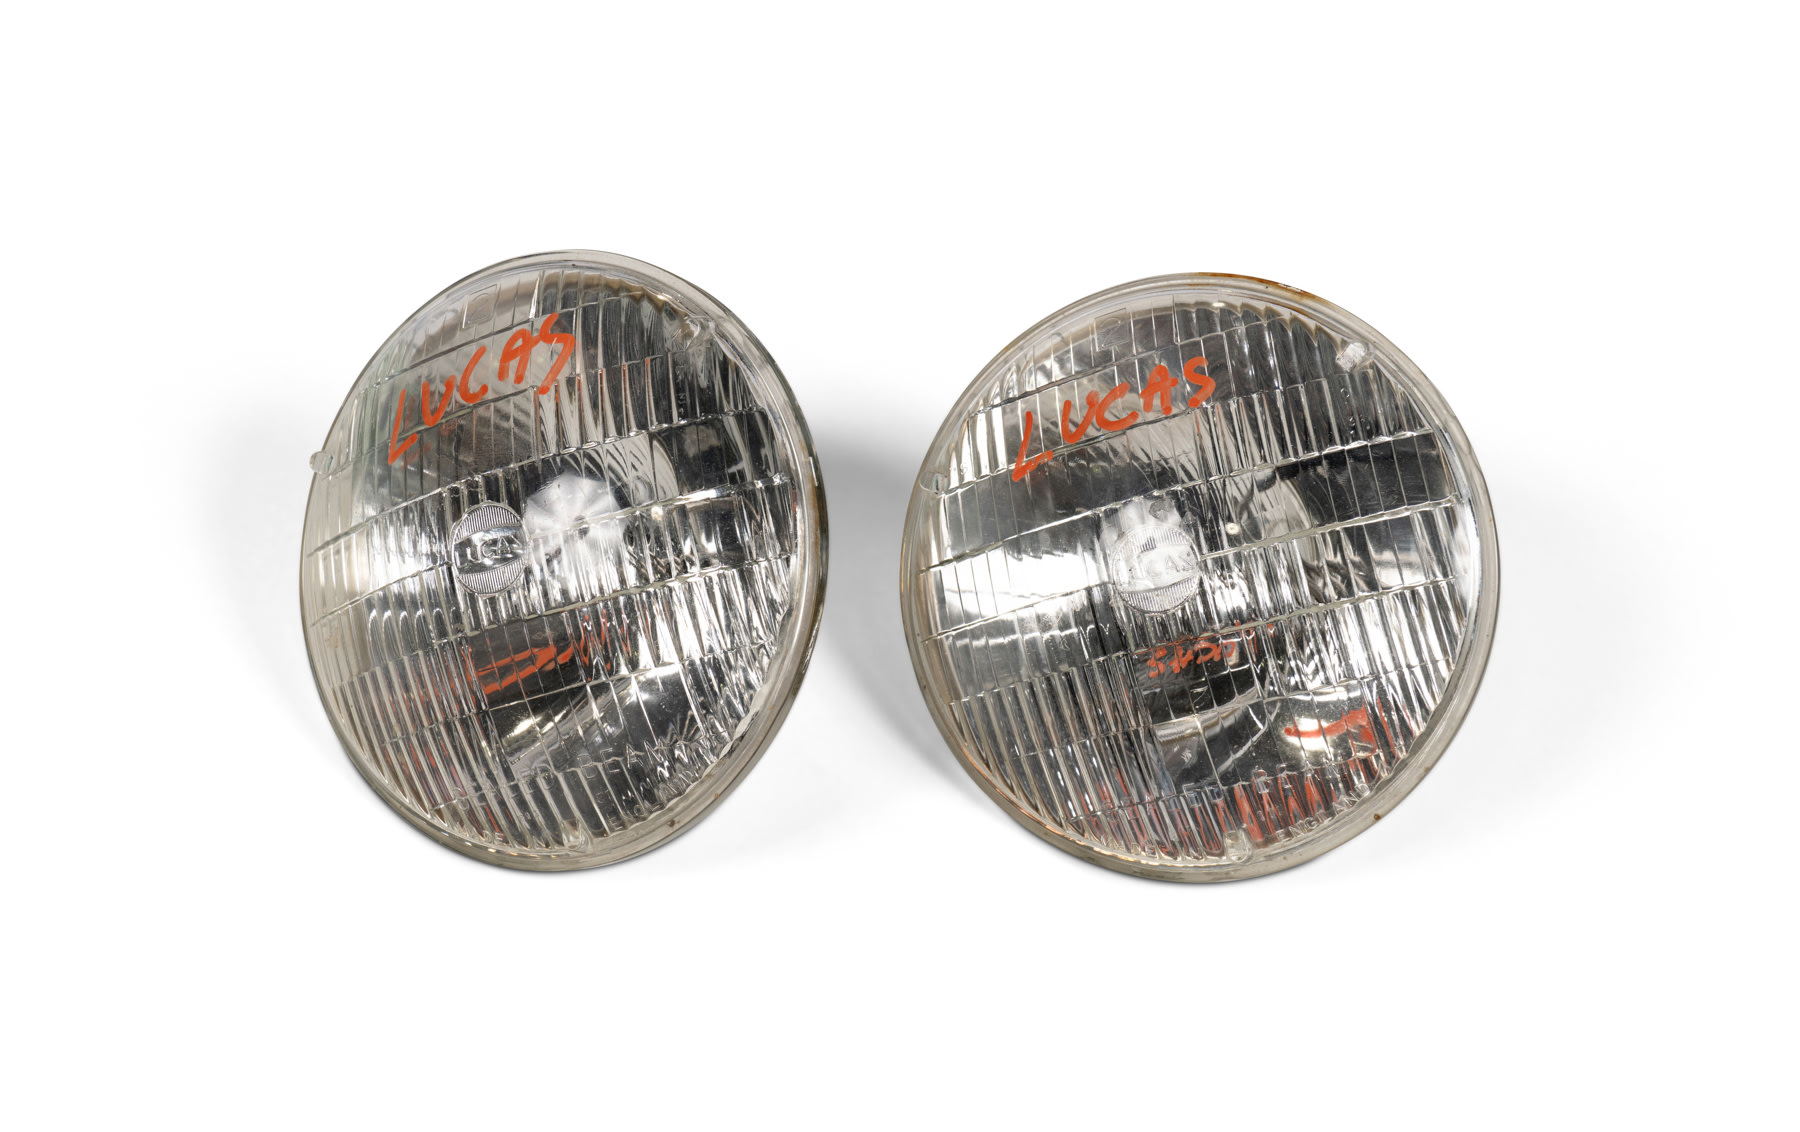 Two Lucas Type S13 81 Seal Beam Headlamps